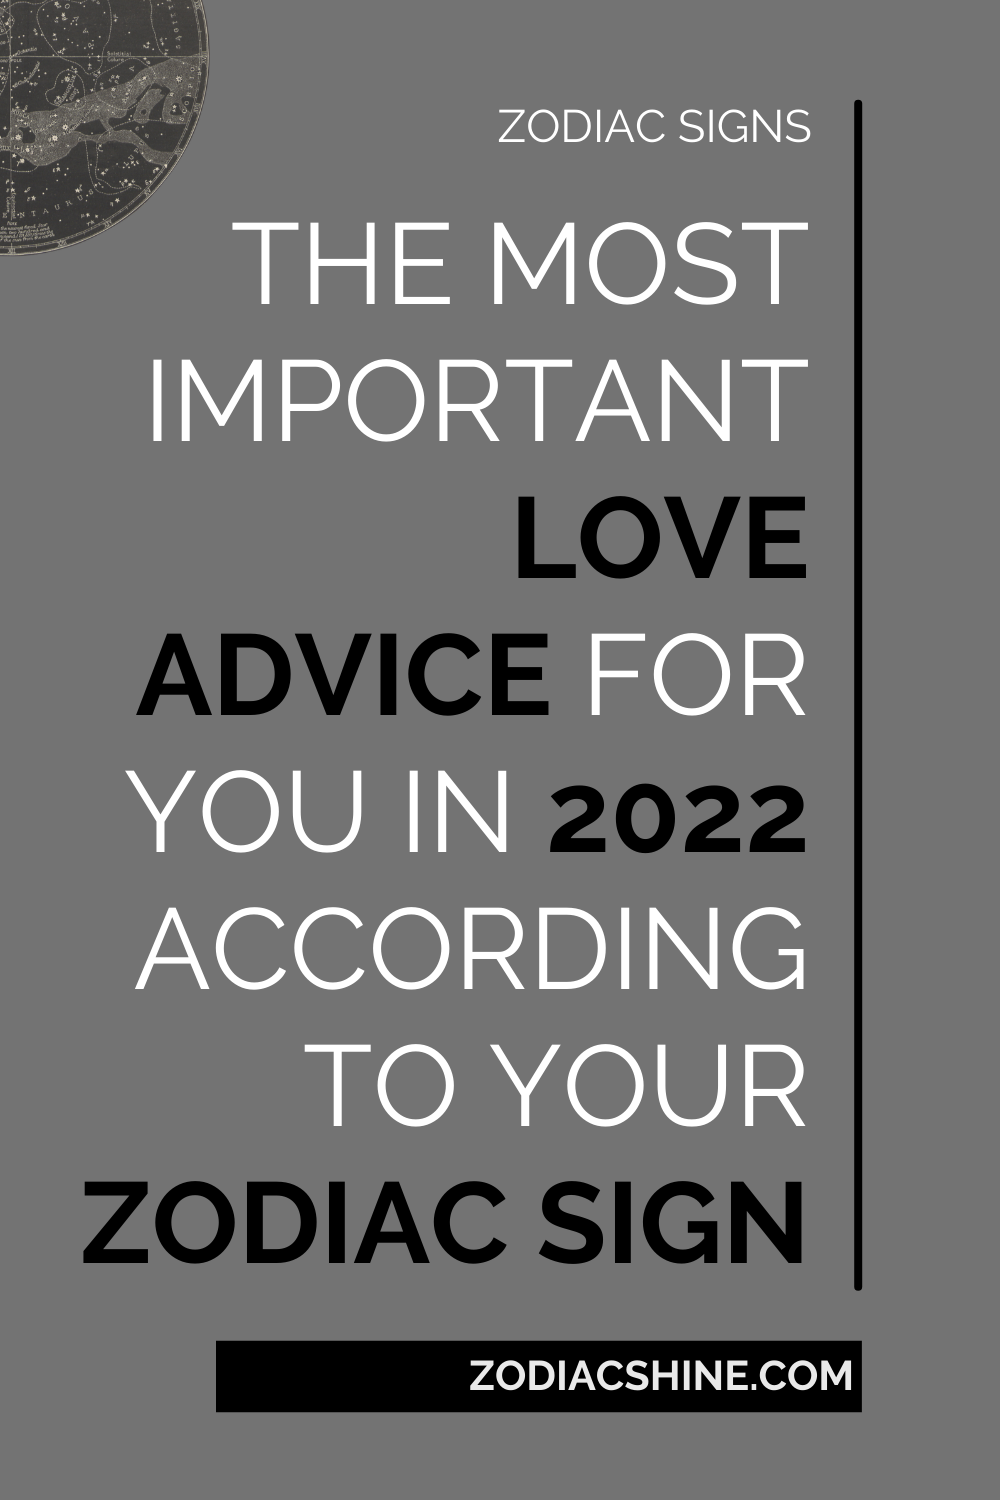 The Most Important Love Advice For You In 2022 According To Your Zodiac Sign